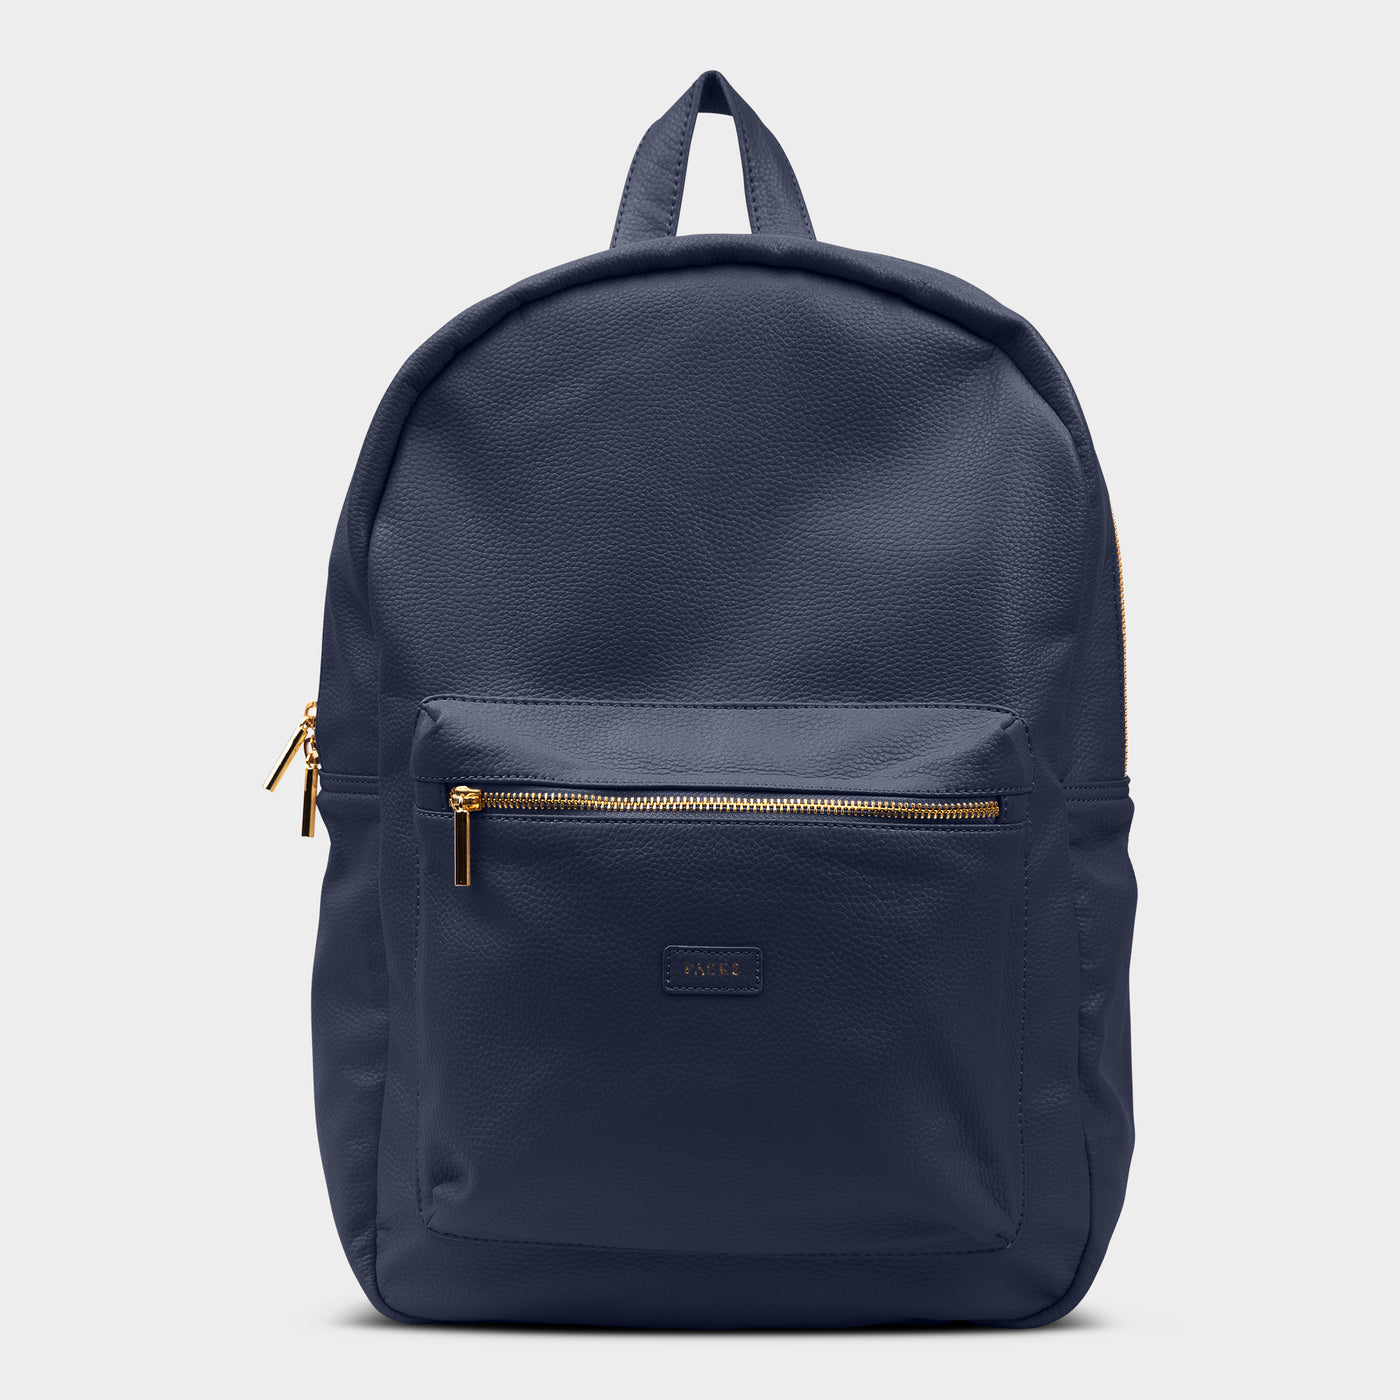 Black and Blue Leather Backpack